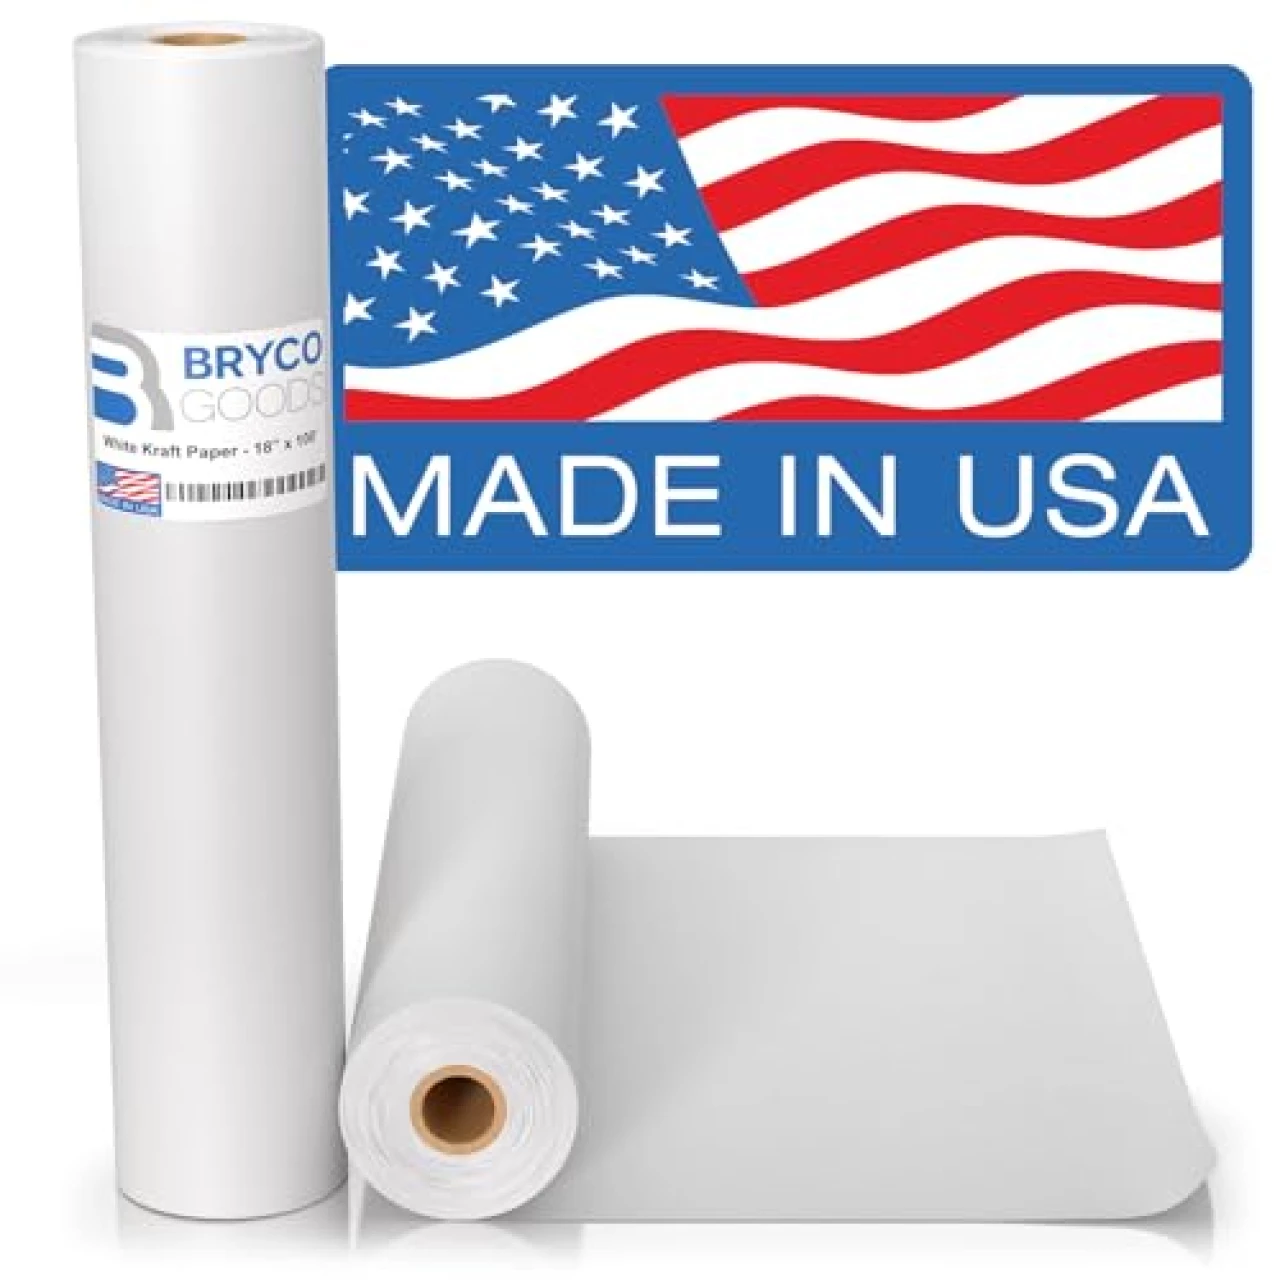 White Kraft Arts and Crafts Paper Roll - 18 inches by 100 Feet (1200 Inch) - Ideal for Paints, Wall Art, Easel Paper, Long Lasting Bulletin Board Paper, Gift Wrapping Paper, Kids Crafts - Made in USA